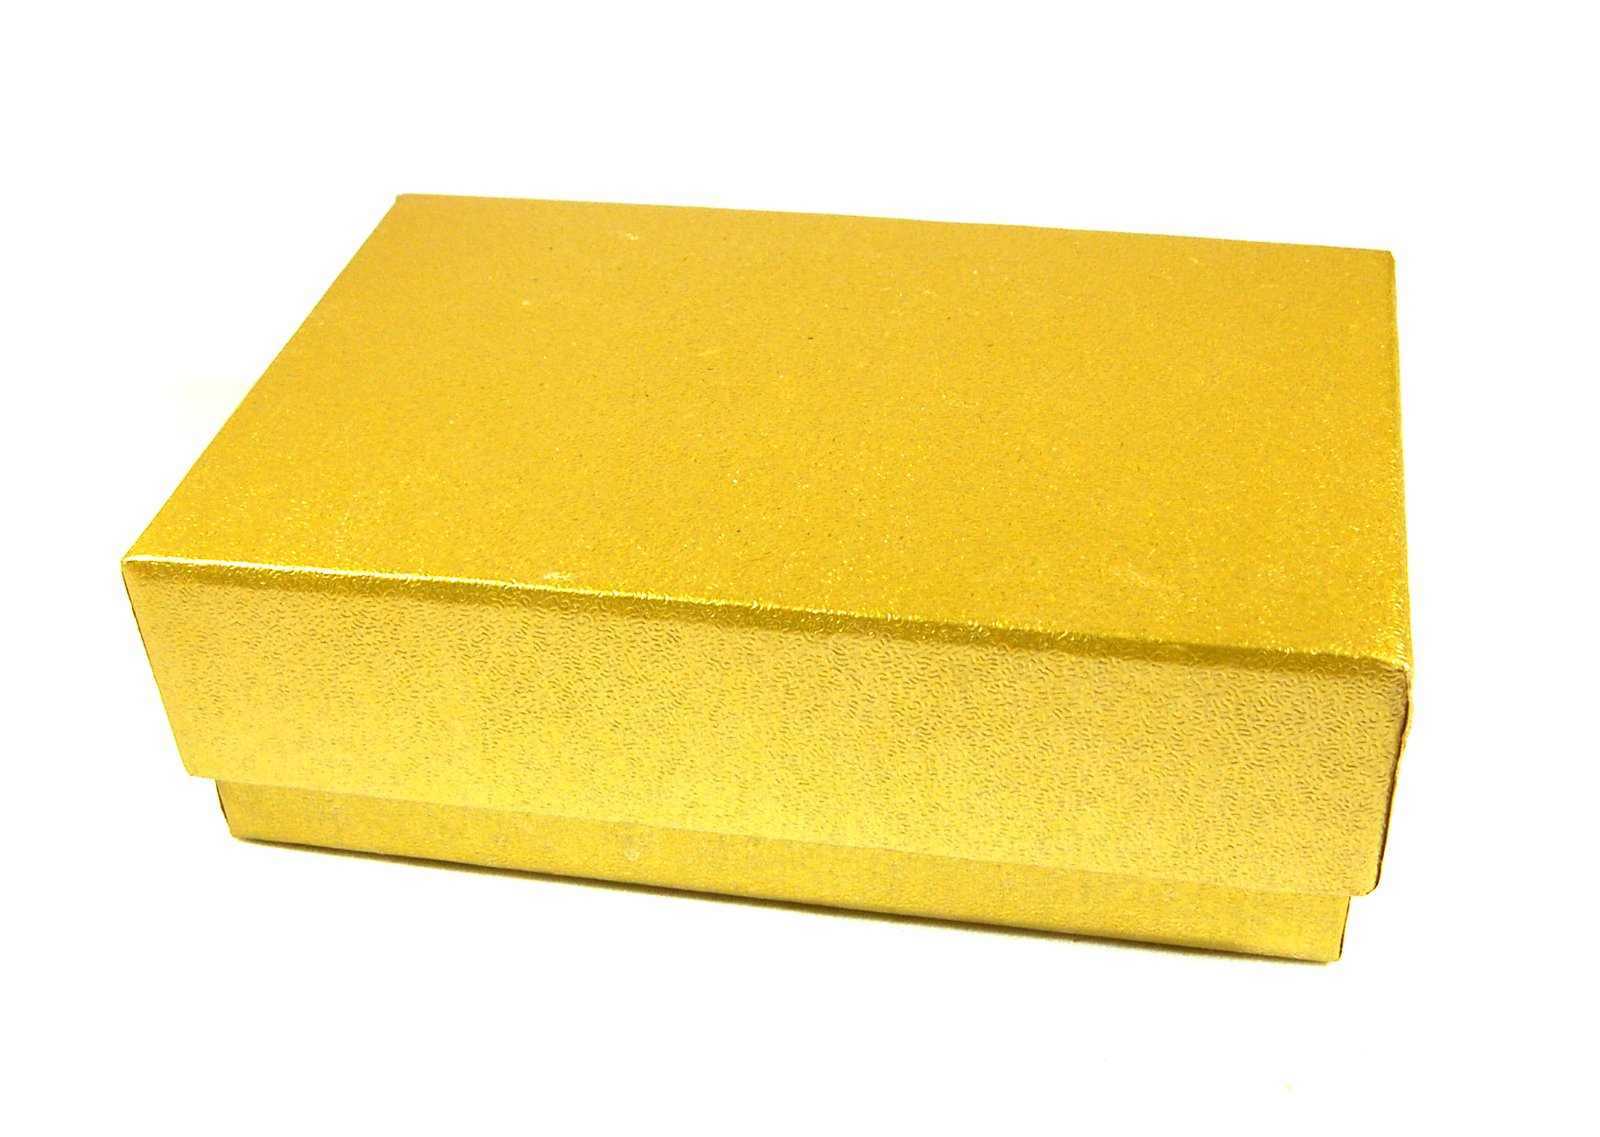 a yellow box on white surface with a shadow